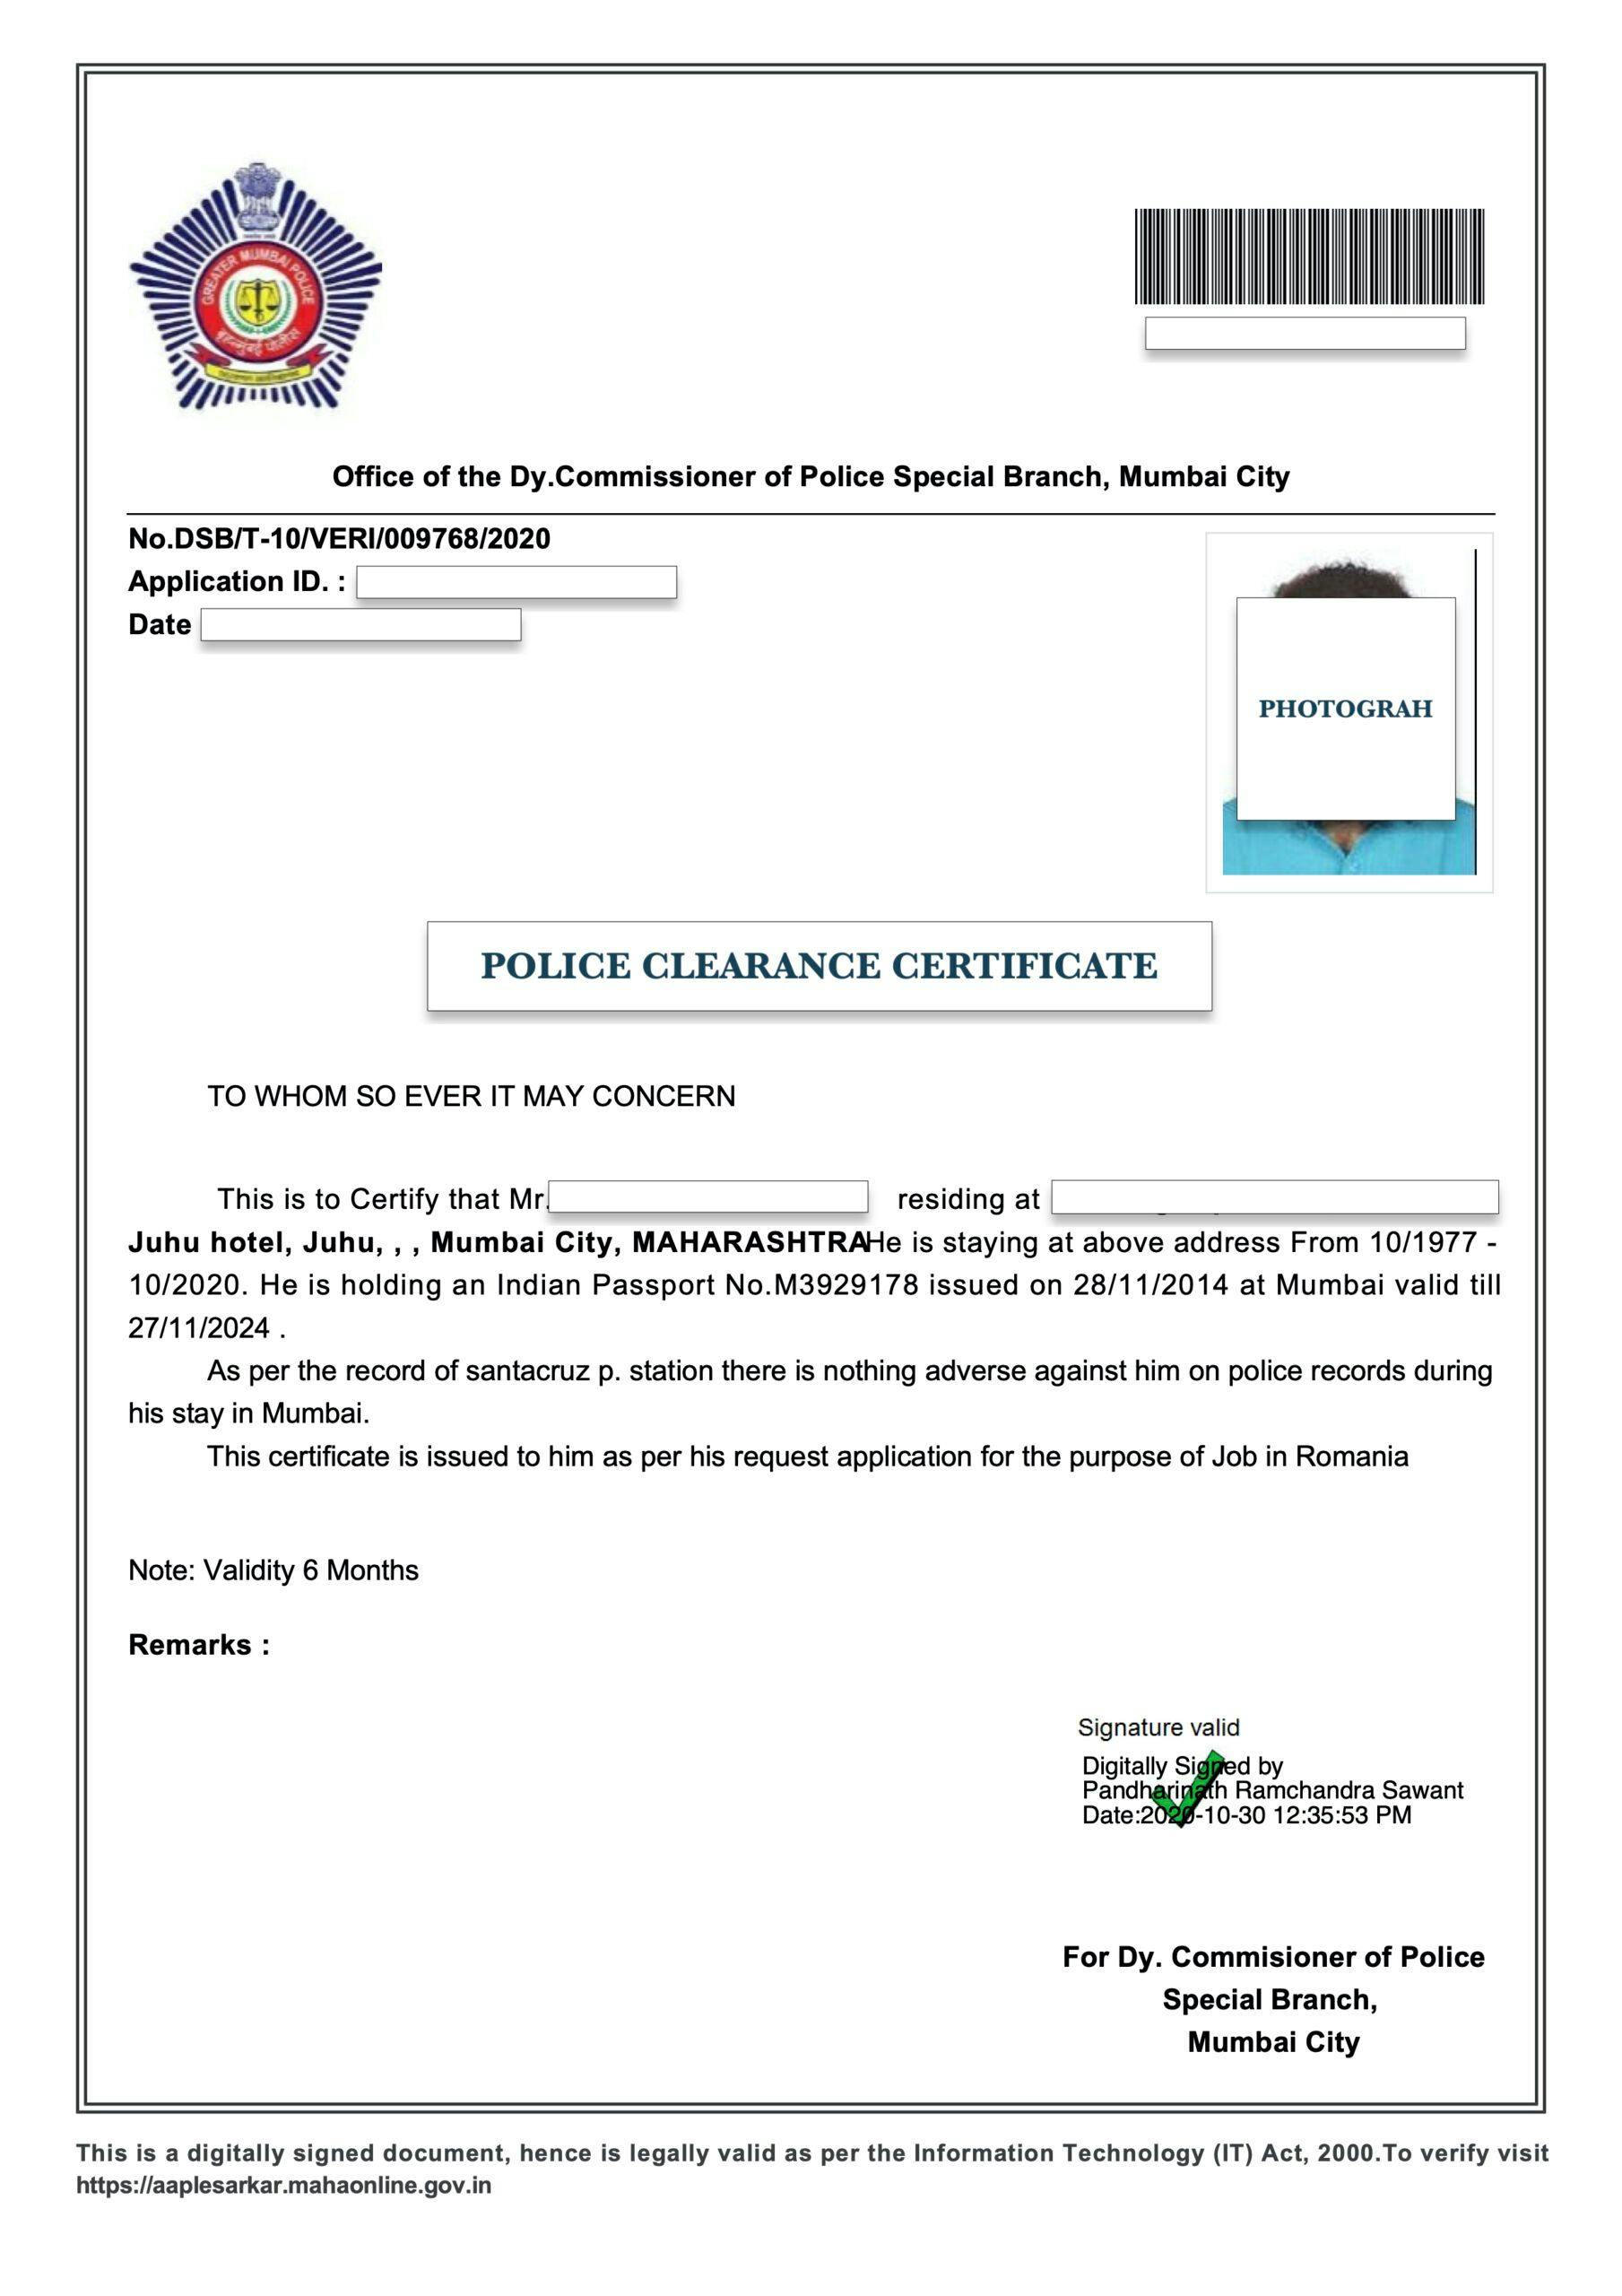 A document showing what the police cearance document looks like